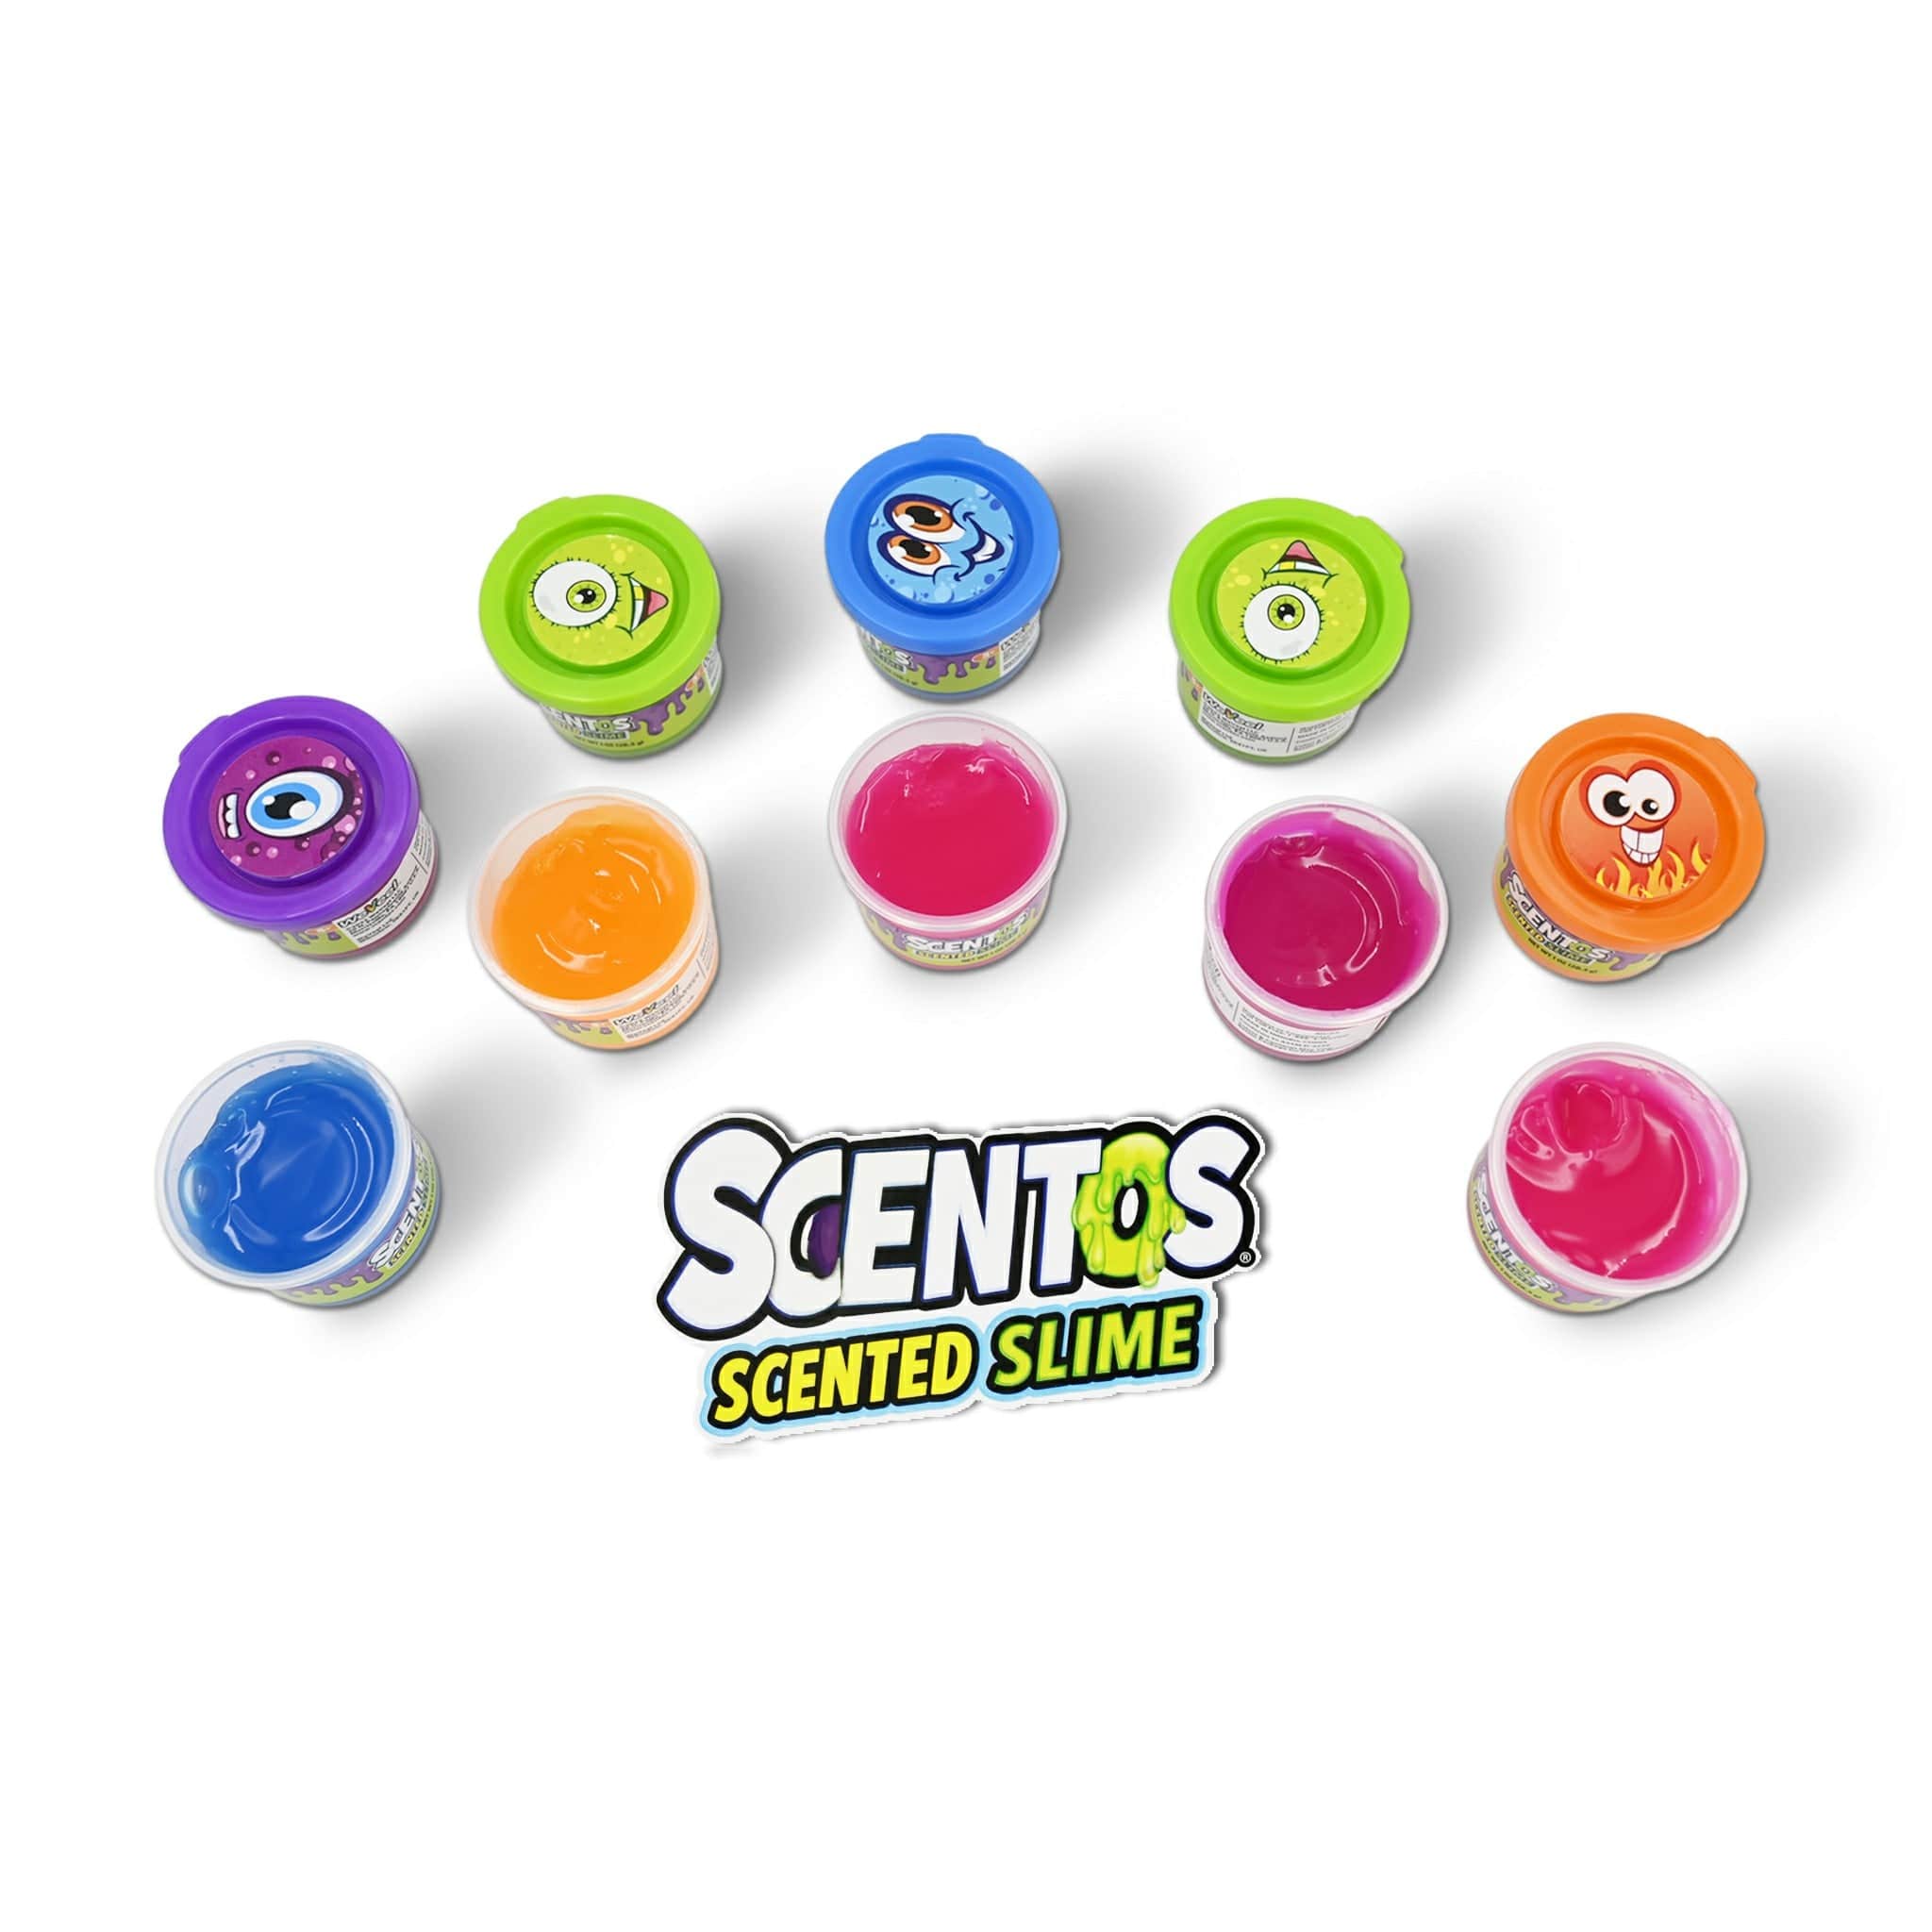 Scentos 1 oz Assorted 10 Pack Scented Slime - Ages 3+, Great for Easter,  Party F